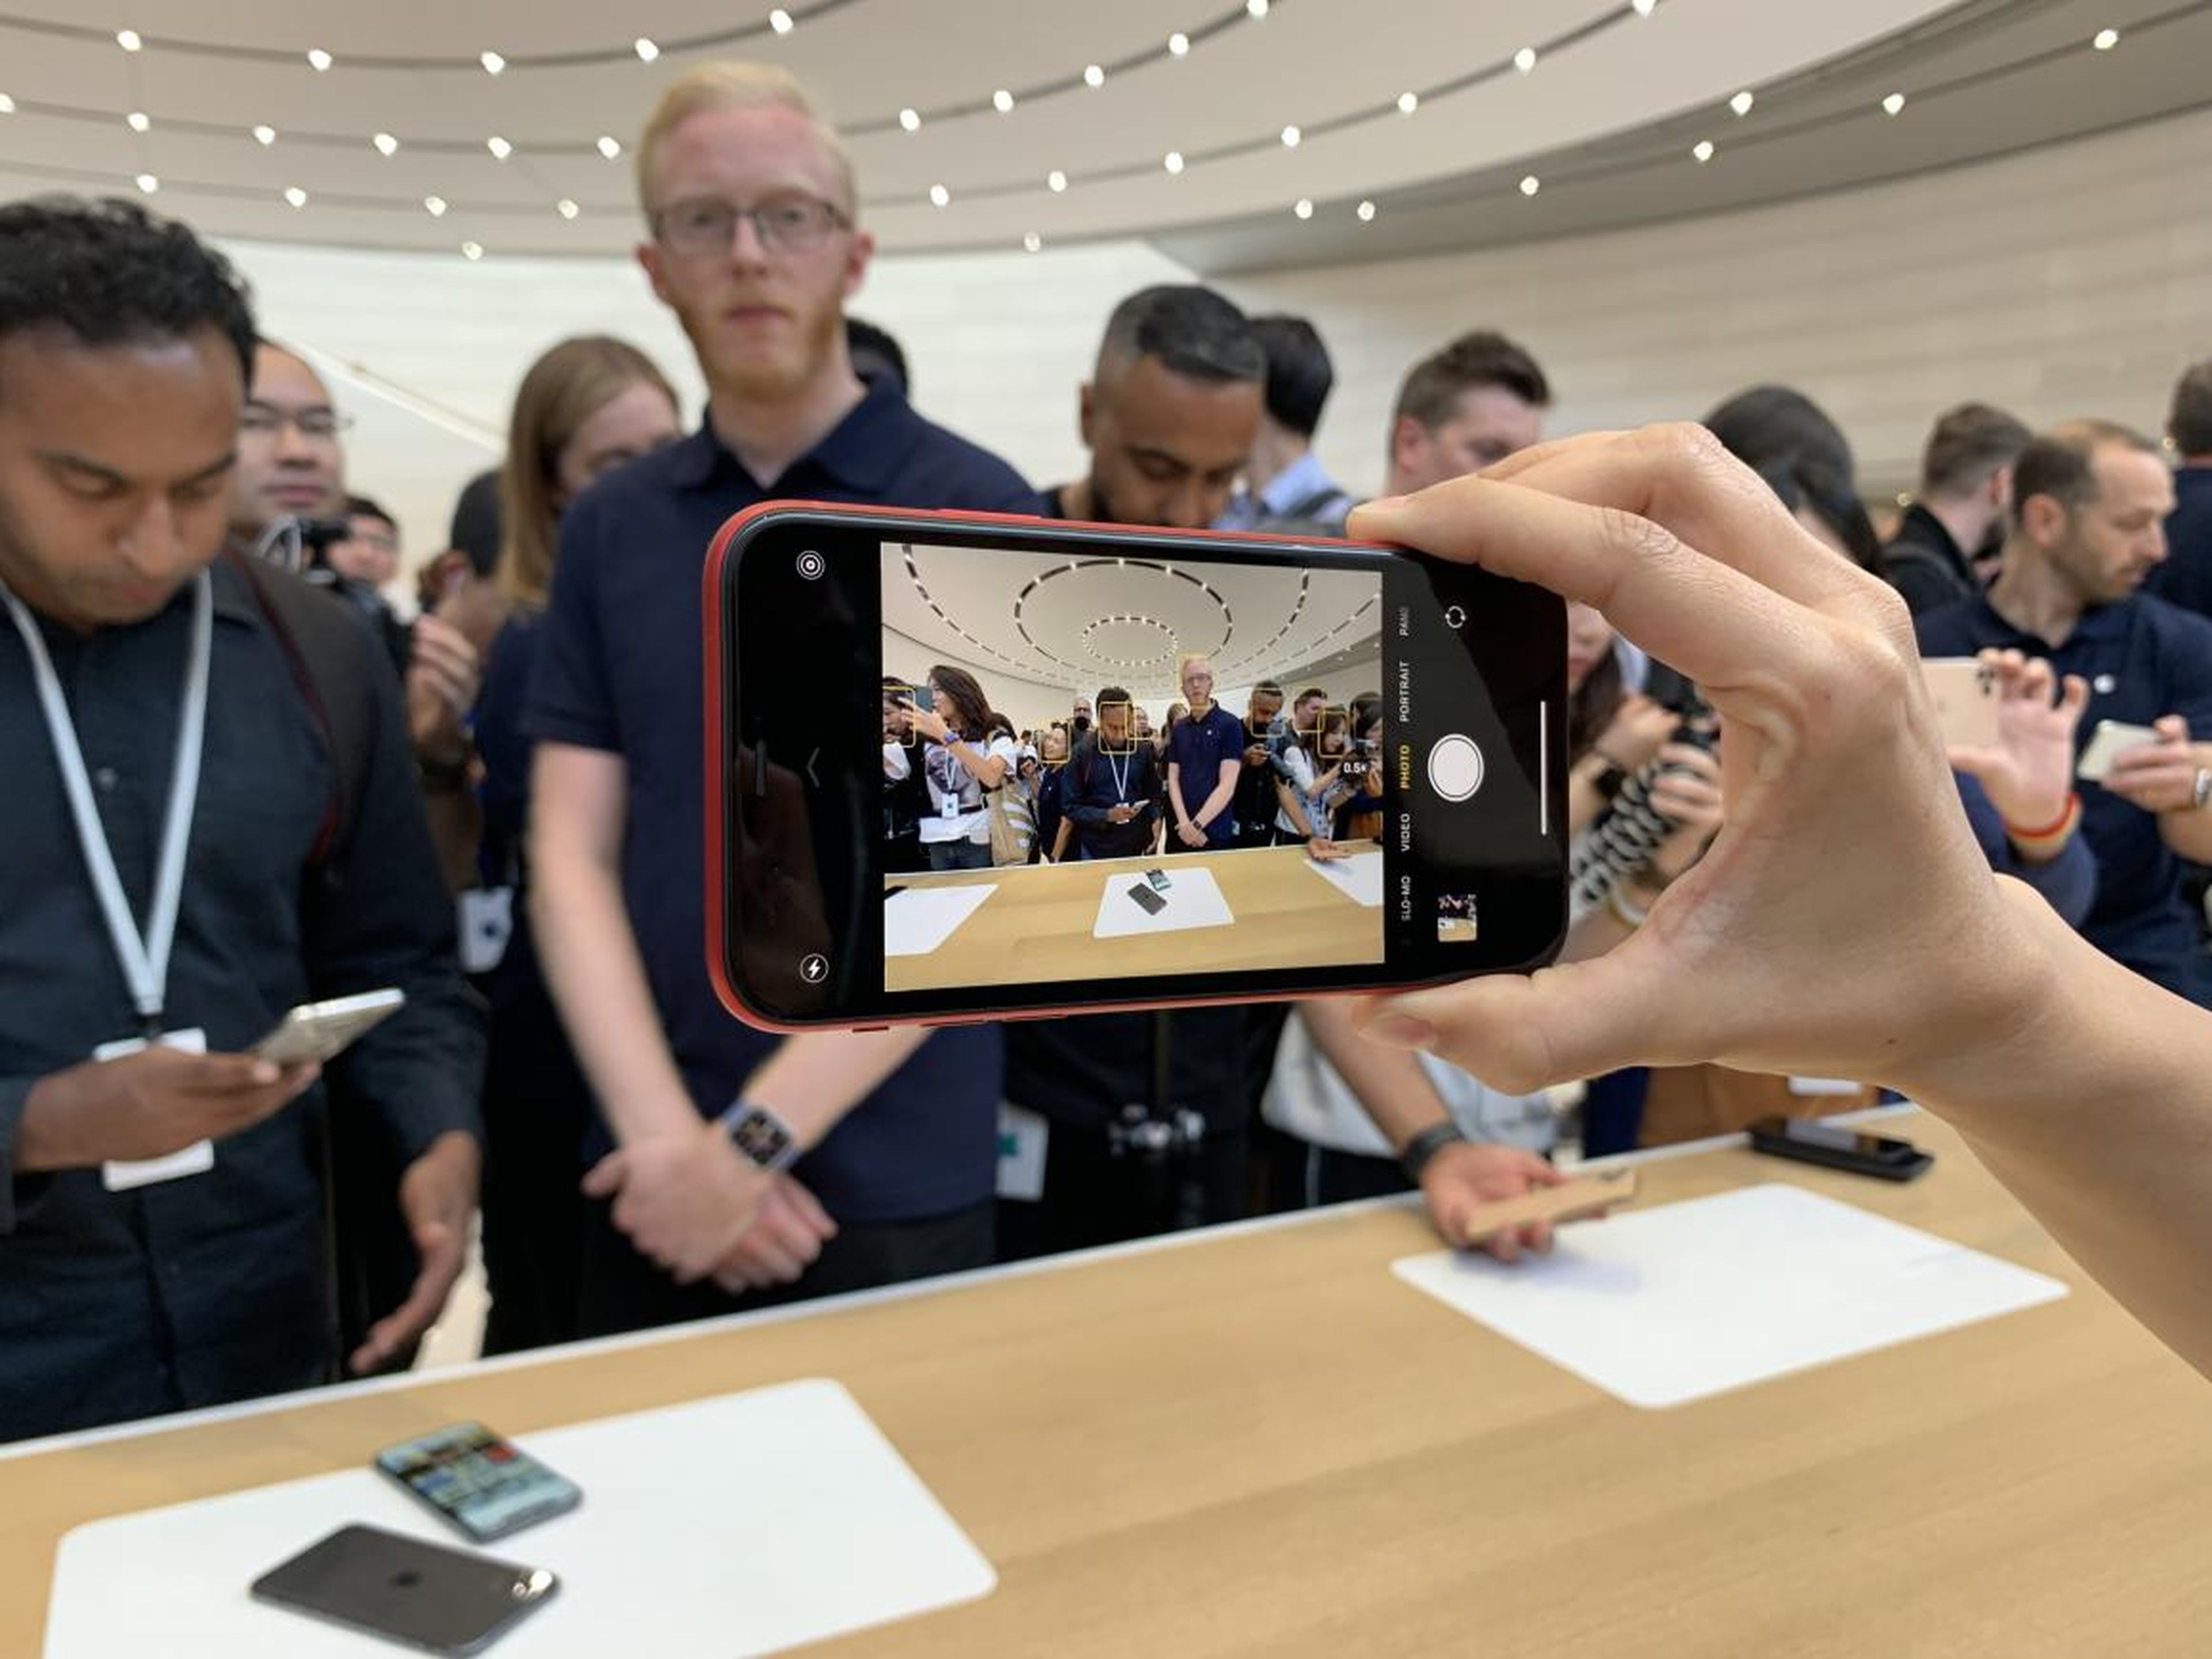 While the iPhone 11 Pro has a few advantages over the standard 11 — a superior display, a telephoto lens, slightly more water resistance, and slightly faster cell connectivity — those differences probably don't justify a $300+